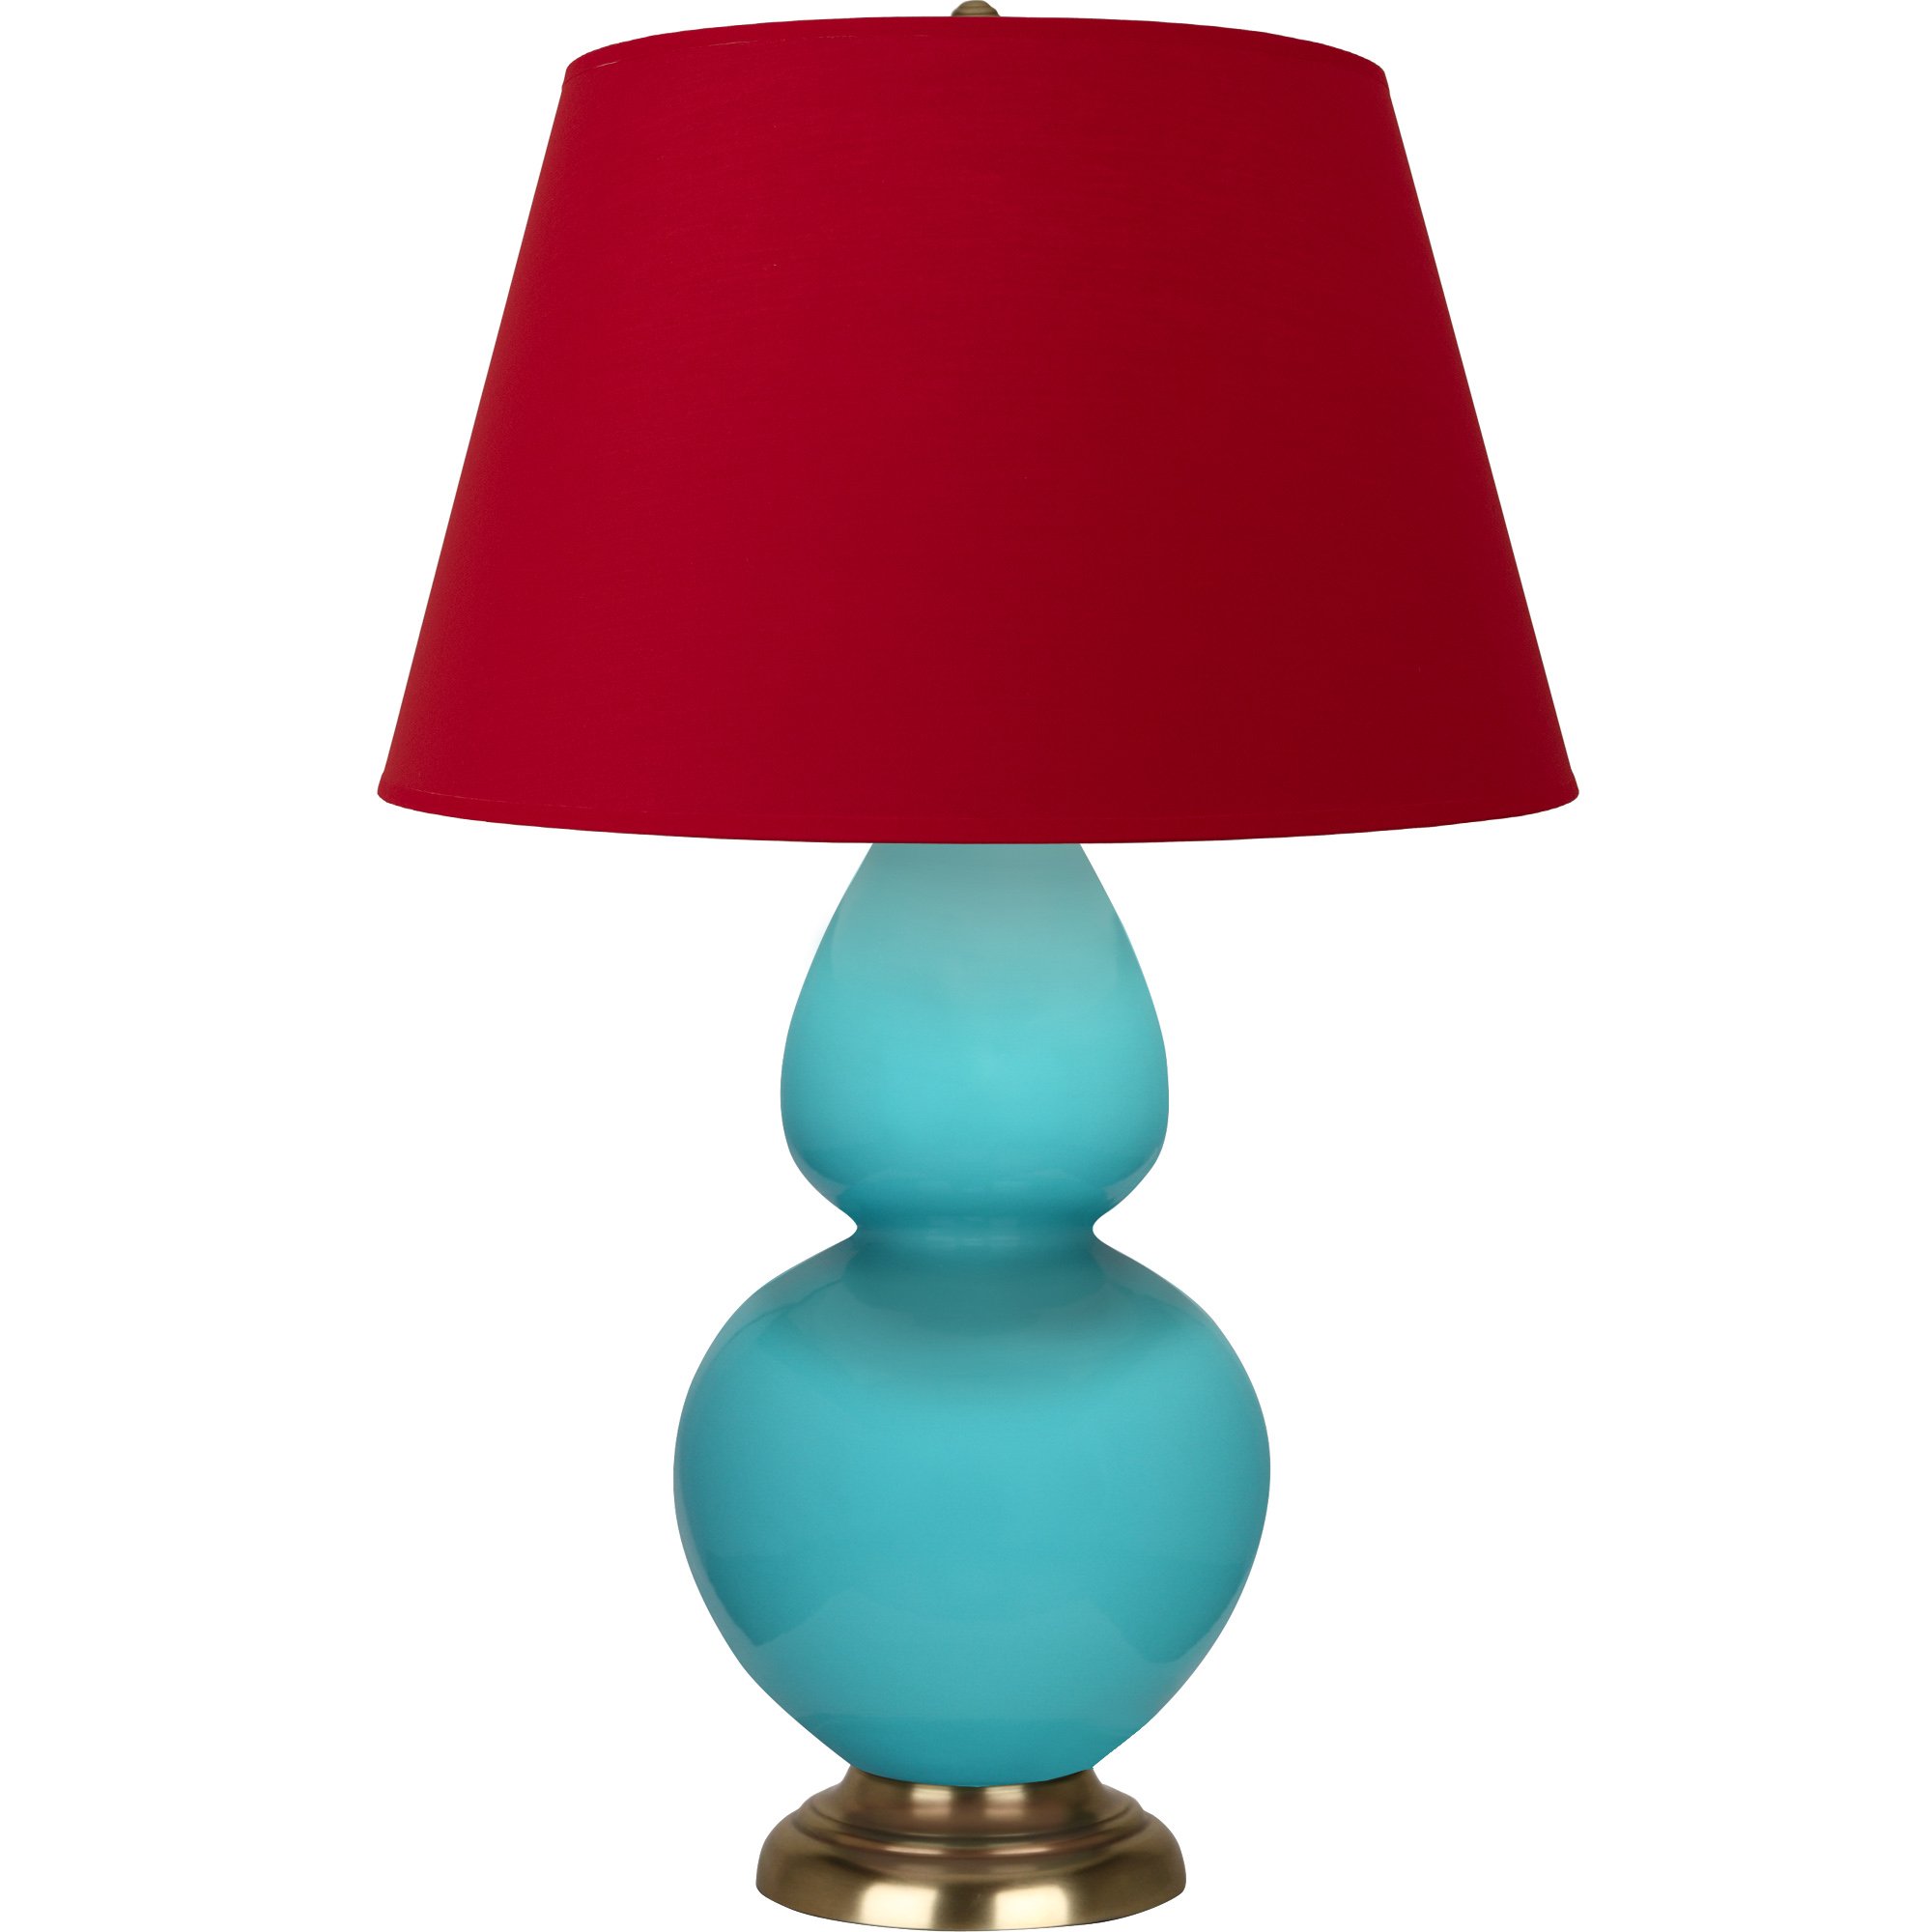 Double Gourd Table Lamp Style #1740R